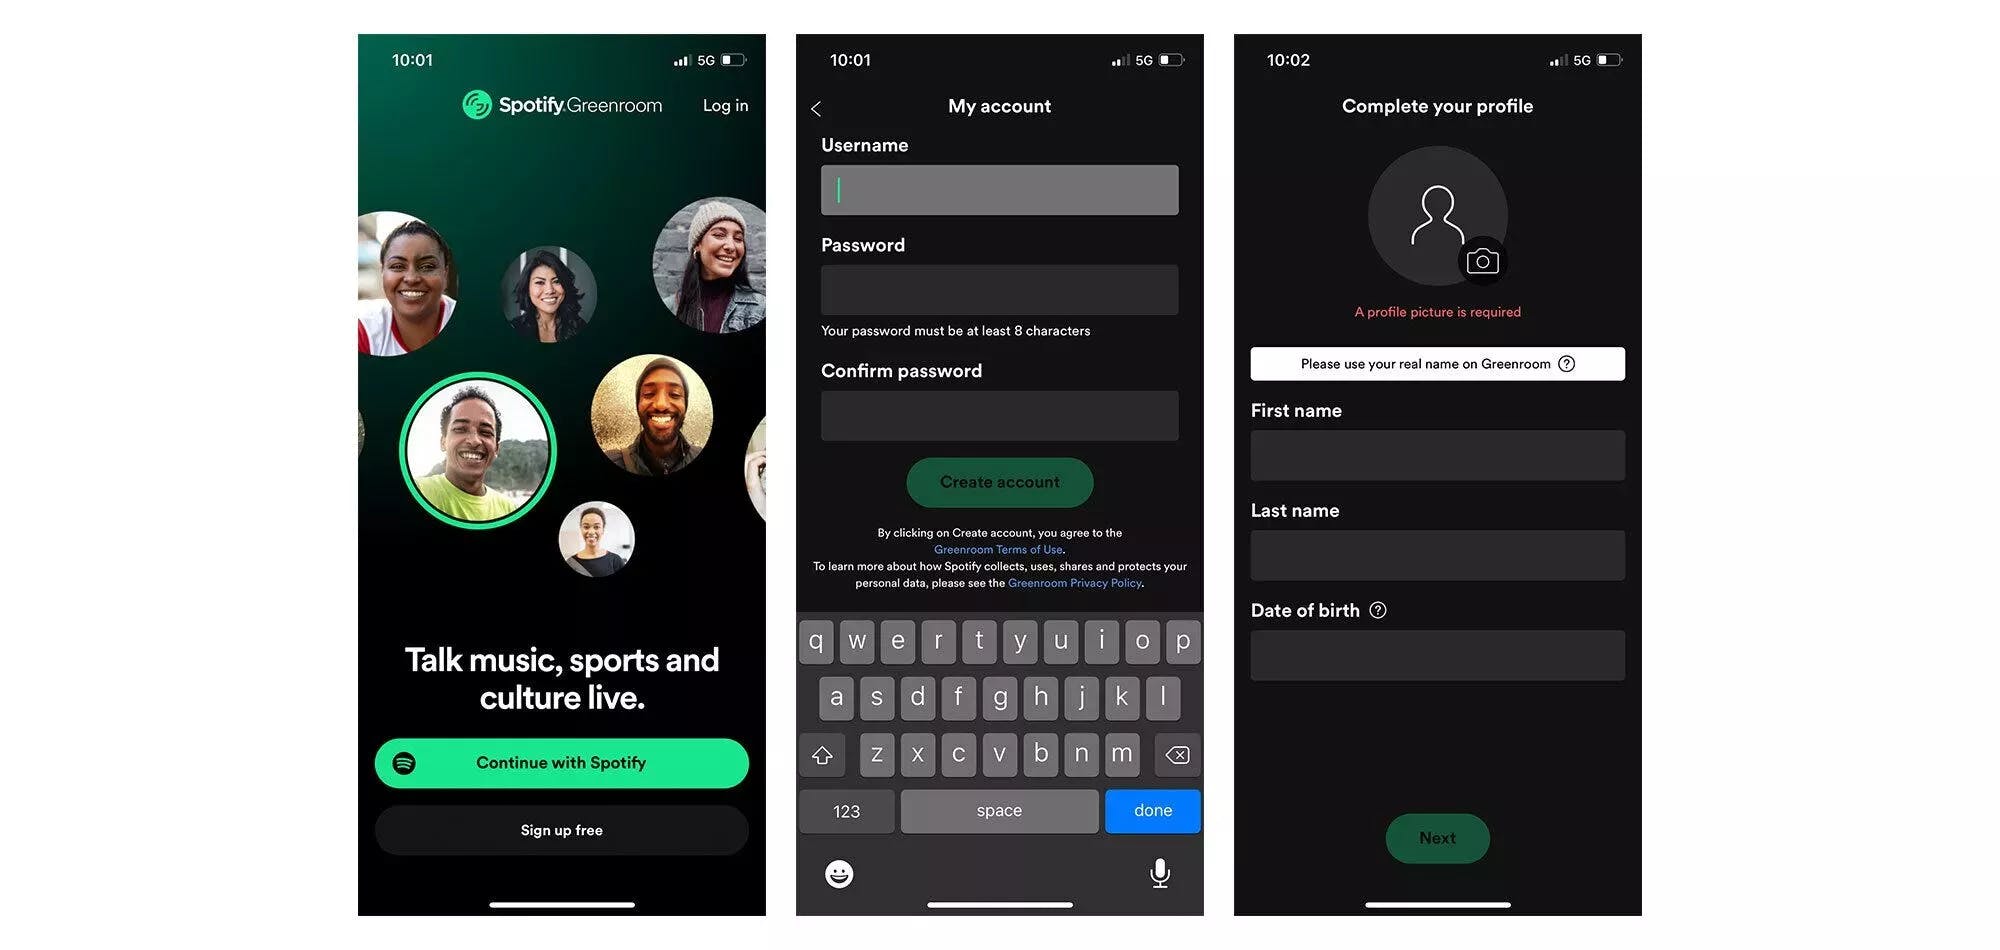 Closeup of Spotify Greenroom login with black and green background and image of 6 people people smiling